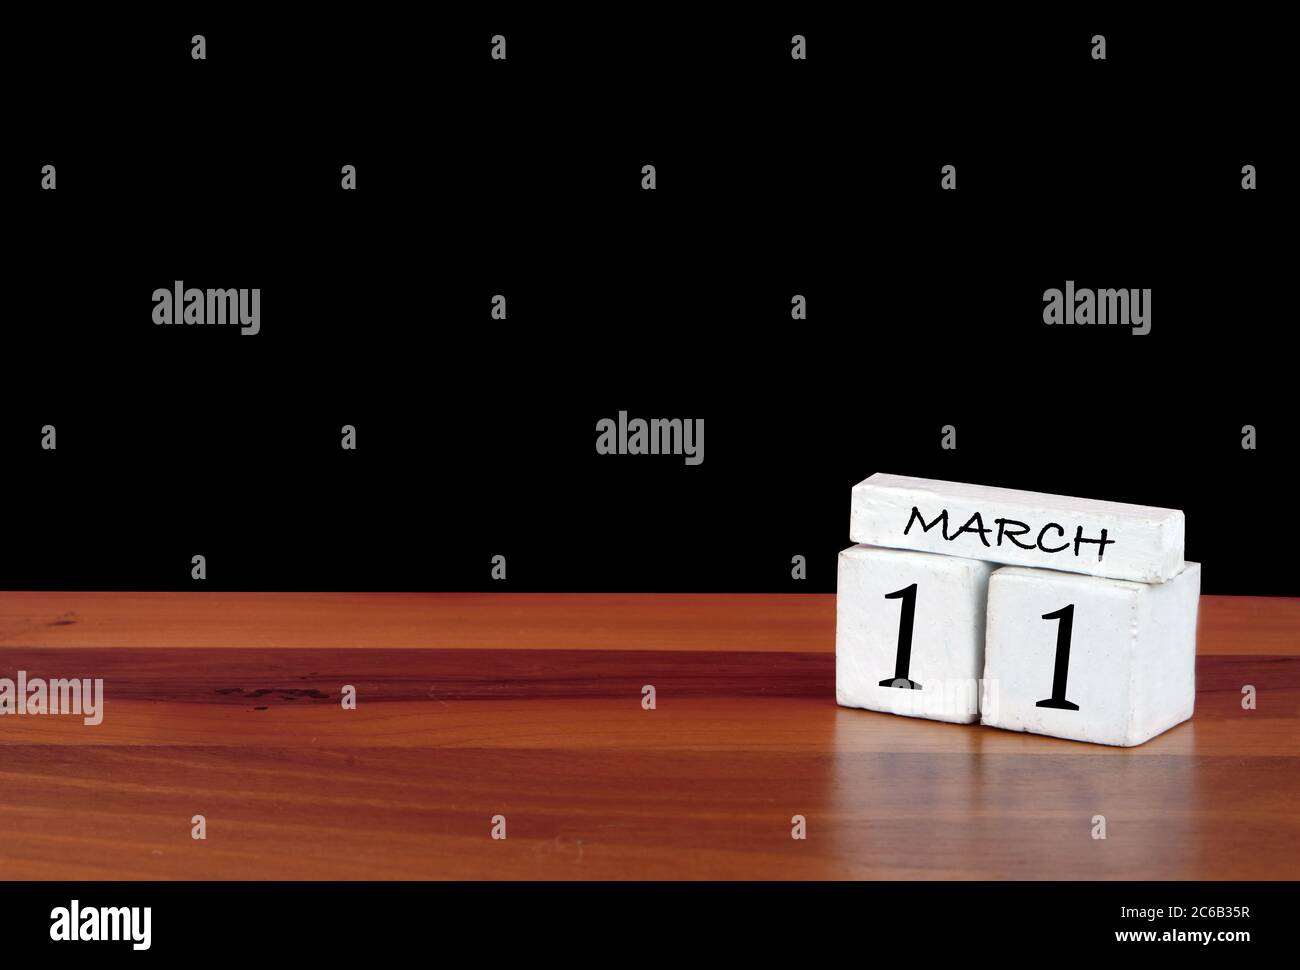 11 March calendar month. 11 days of the month. Reflected calendar on wooden floor with black background Stock Photo